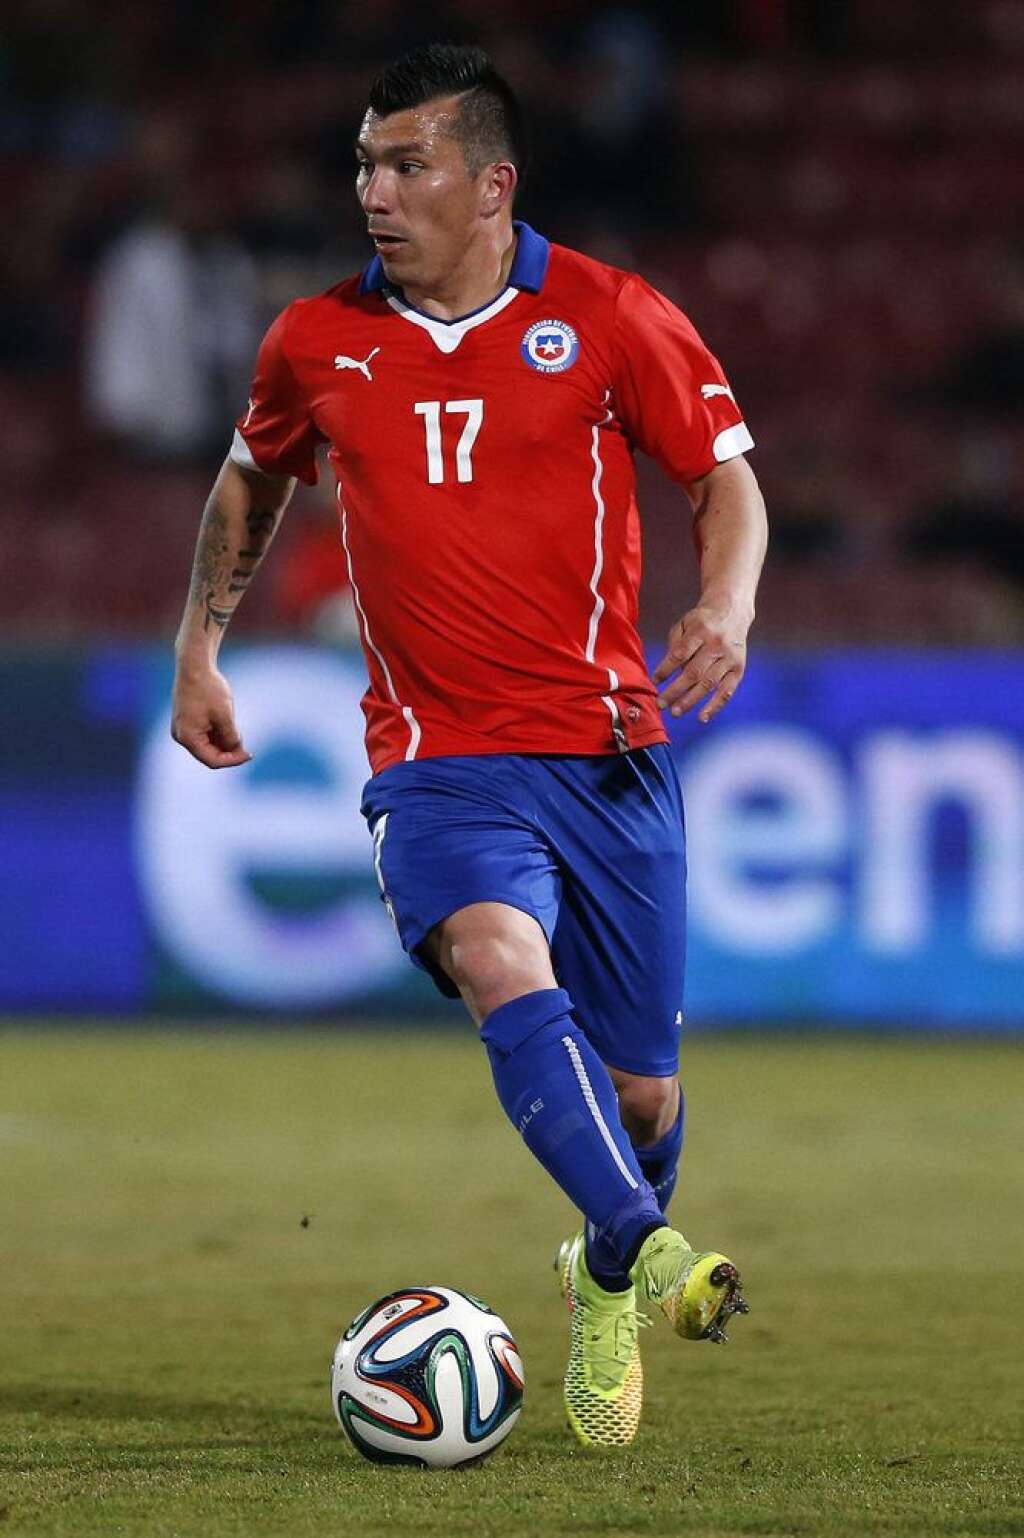 Gary Medel (Chili) - Son club: Cardiff City (Pays de Galles/Angleterre) Poste: milieu